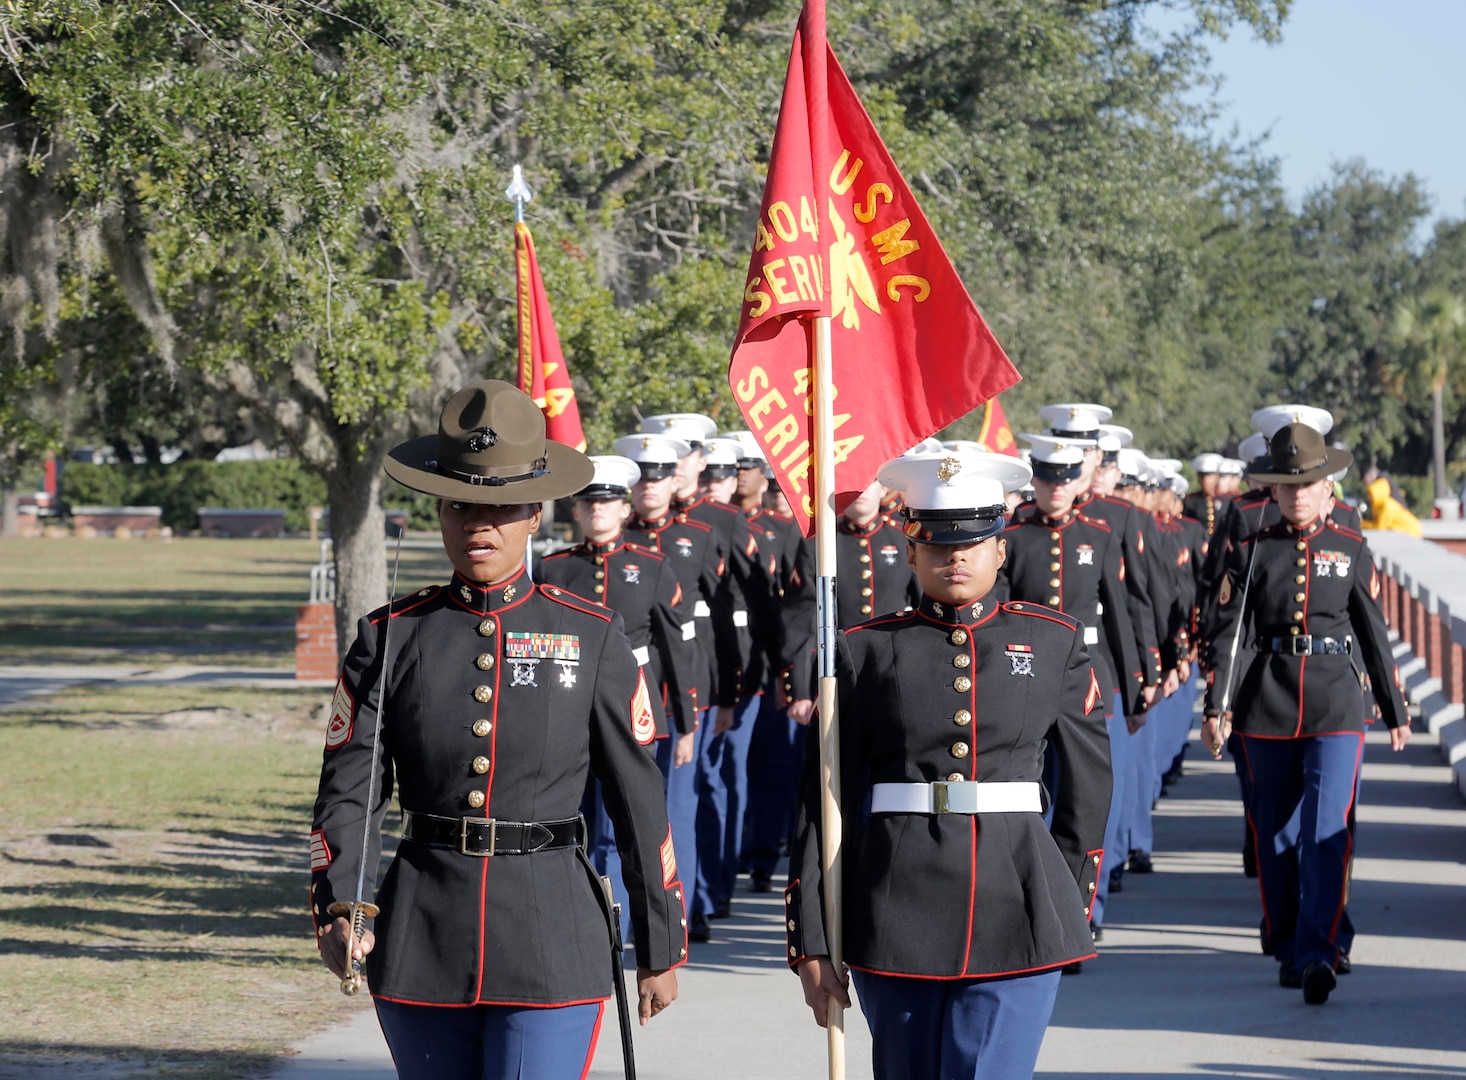 Historic uniform change for female Marines; 'there will be no